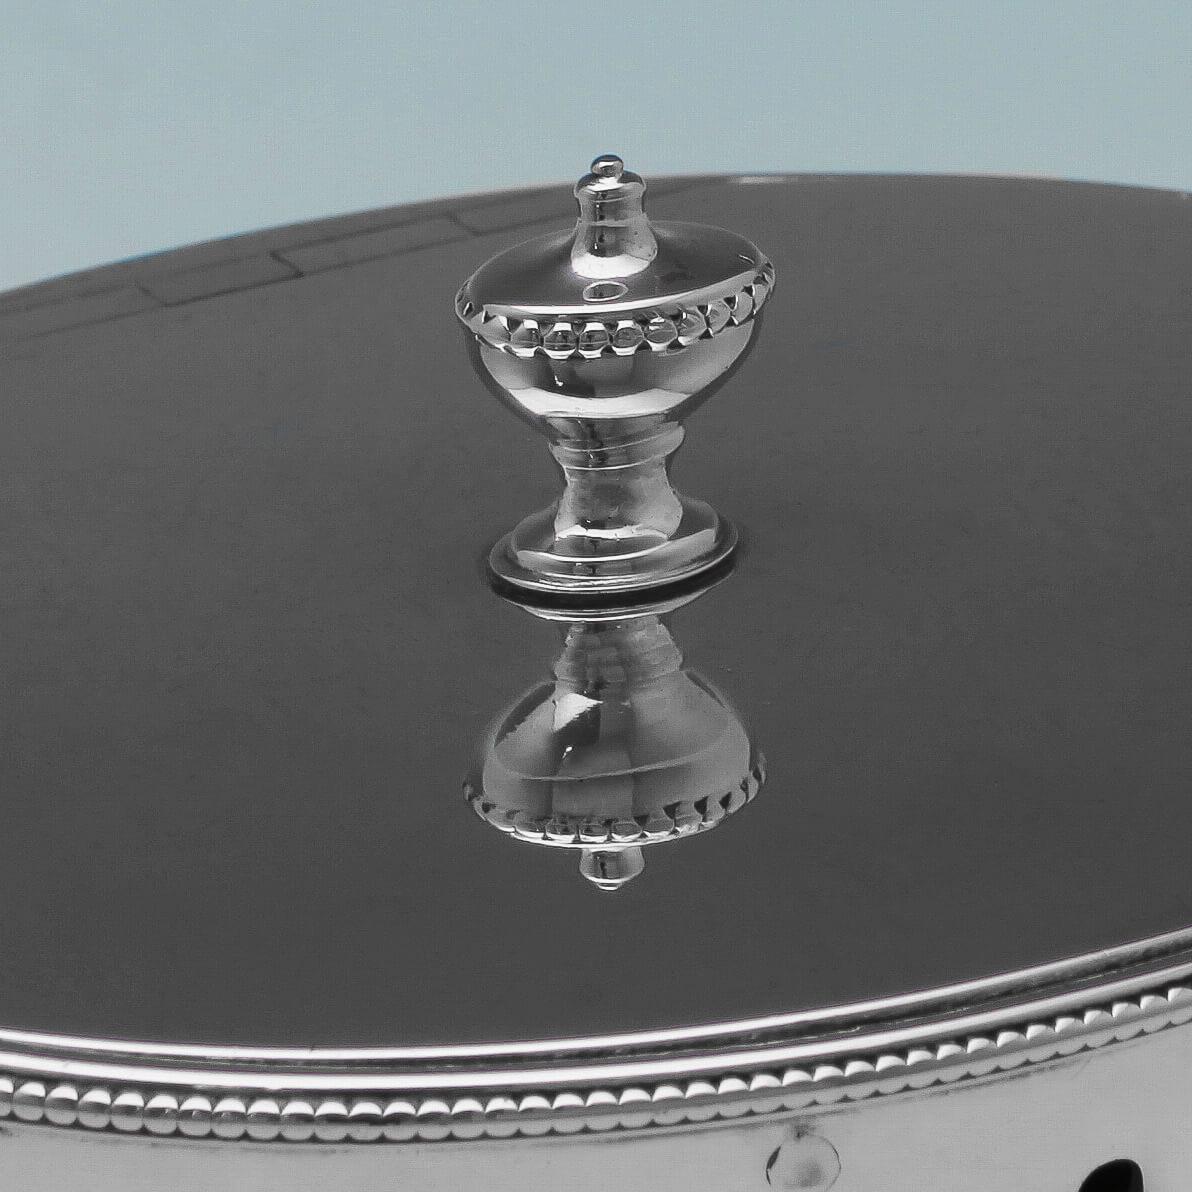 Hallmarked in London in 1780 by Hester Bateman, this elegant, George III, antique, sterling silver tea caddy is pleasingly simple, with a plain oval body decorated top and bottom with a thin band of beading and featuring an original crest. The tea